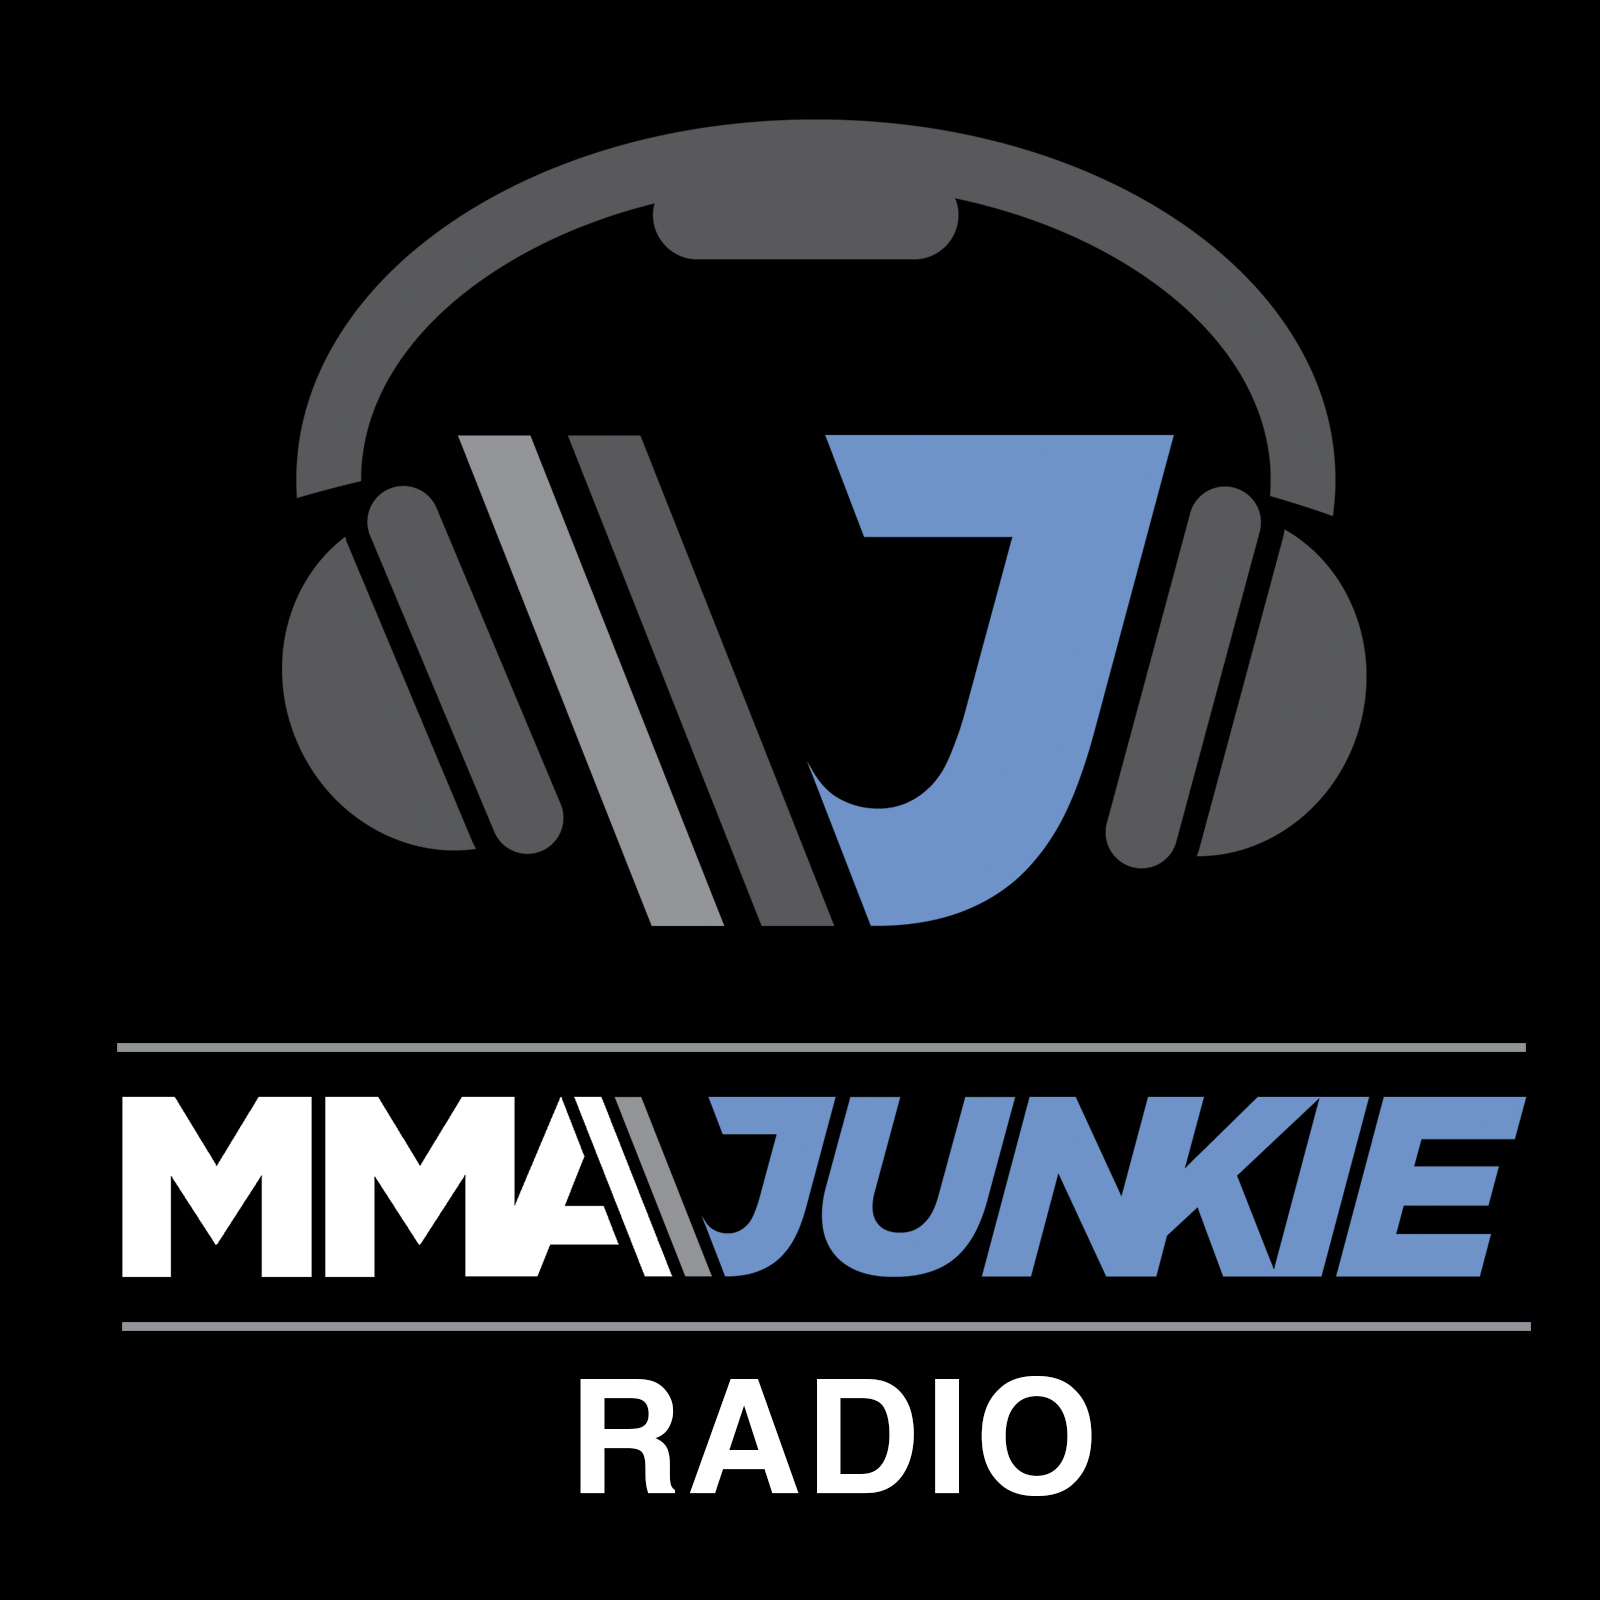 Ep. #3326: Dana White speaks out, was it good or bad, Louie Sutherland interview, more